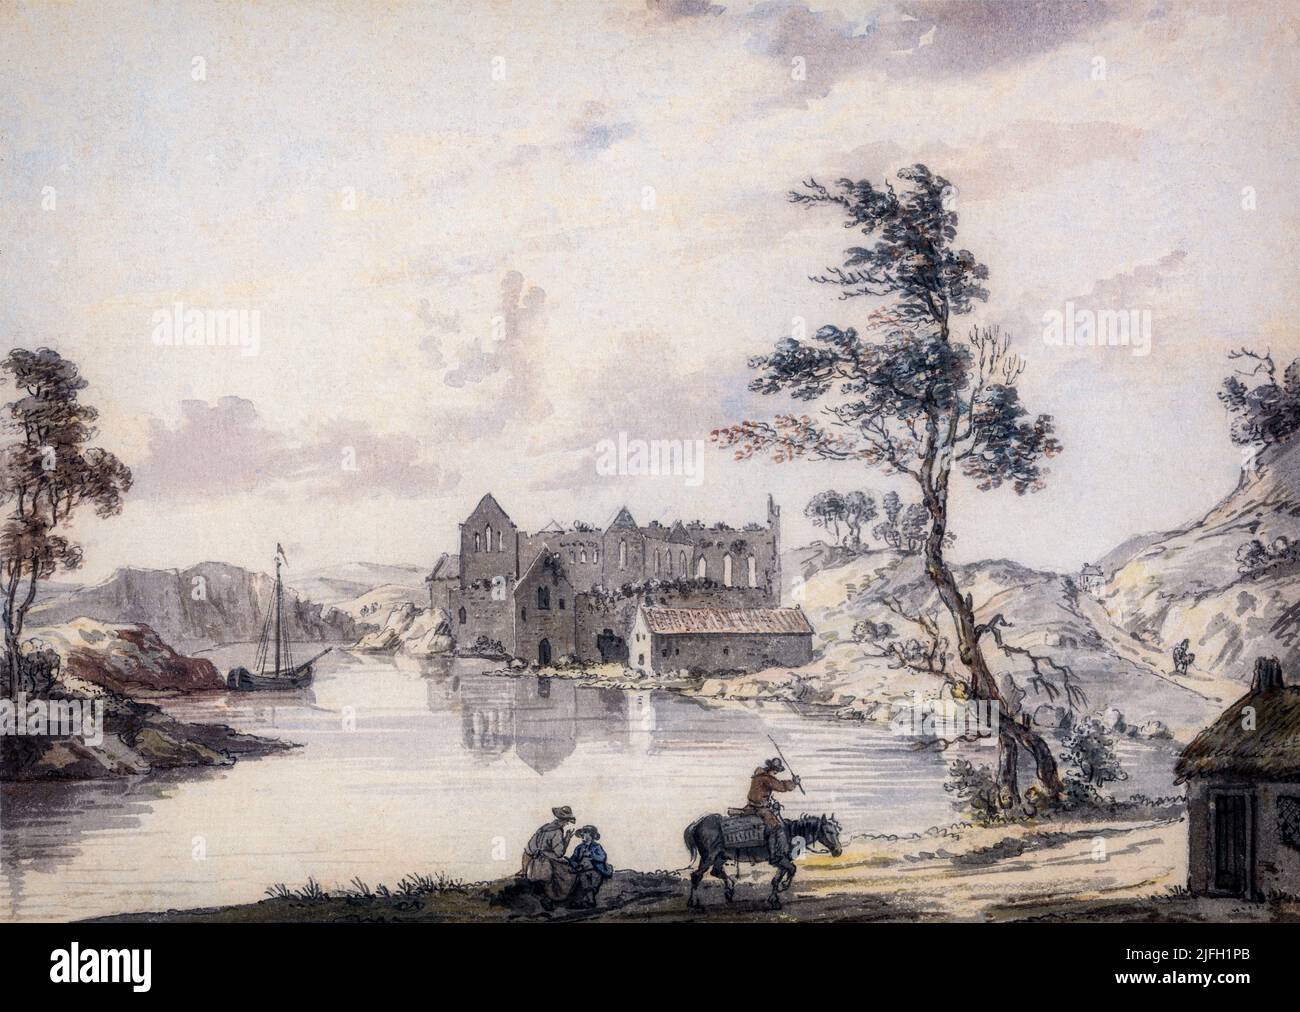 A painting by the English artist Paul Sandby (1731-1809) of Askeaton Abbey or Askeaton Friary, located on the east bank of the River Deel, County Limerick, Ireland. A former Franciscan monastery it was plundered and later abandoned during the Second Desmond Rebellion of 1579. Revived in 1627 it was again abandoned in 1648 when Cromwell’s forces neared. It was reestablished in 1658 and continued to house friars until 1714. Stock Photo